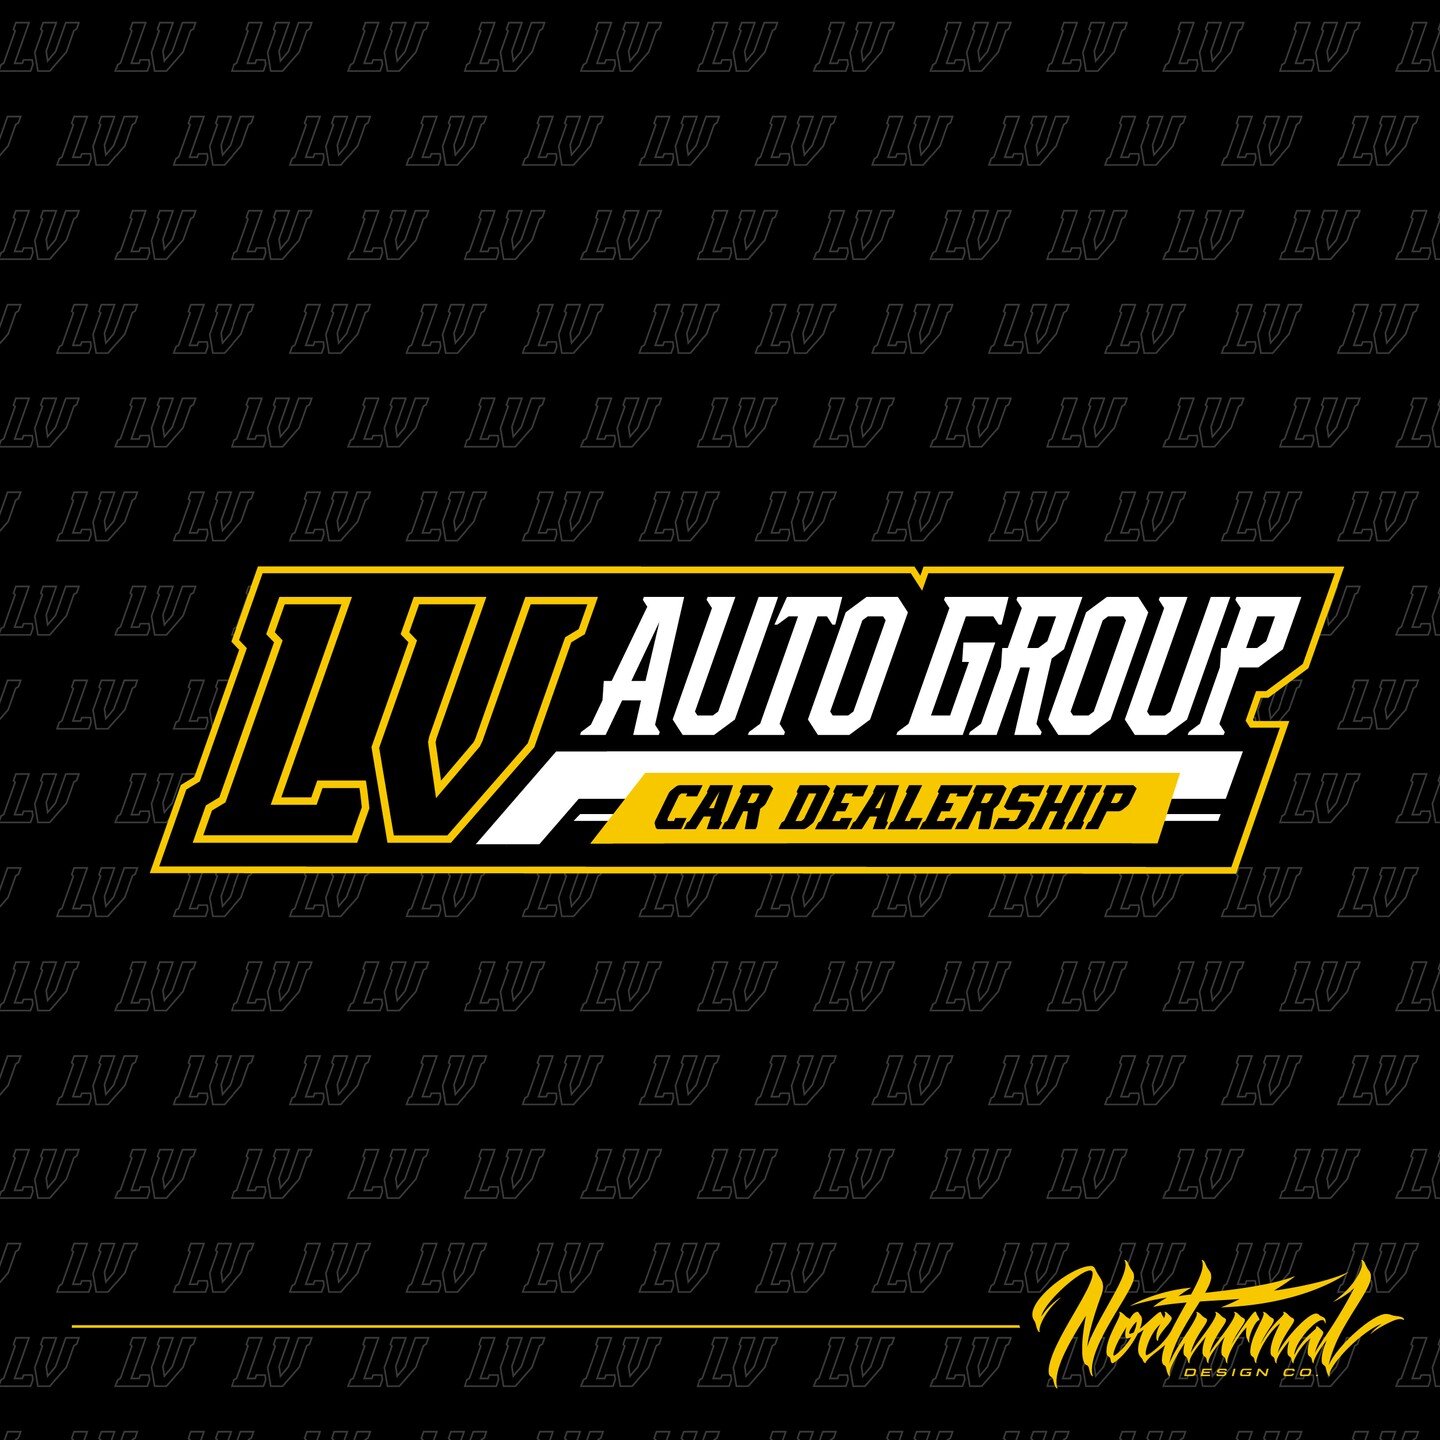 Just delivered a fresh logo design pack for @lv_autogroup 🚗 Thrilled to collaborate once again with our repeat client Luke, as we helped him shape his new venture. Staying true to his bold yellow colour scheme, we crafted a sharp modern design that 